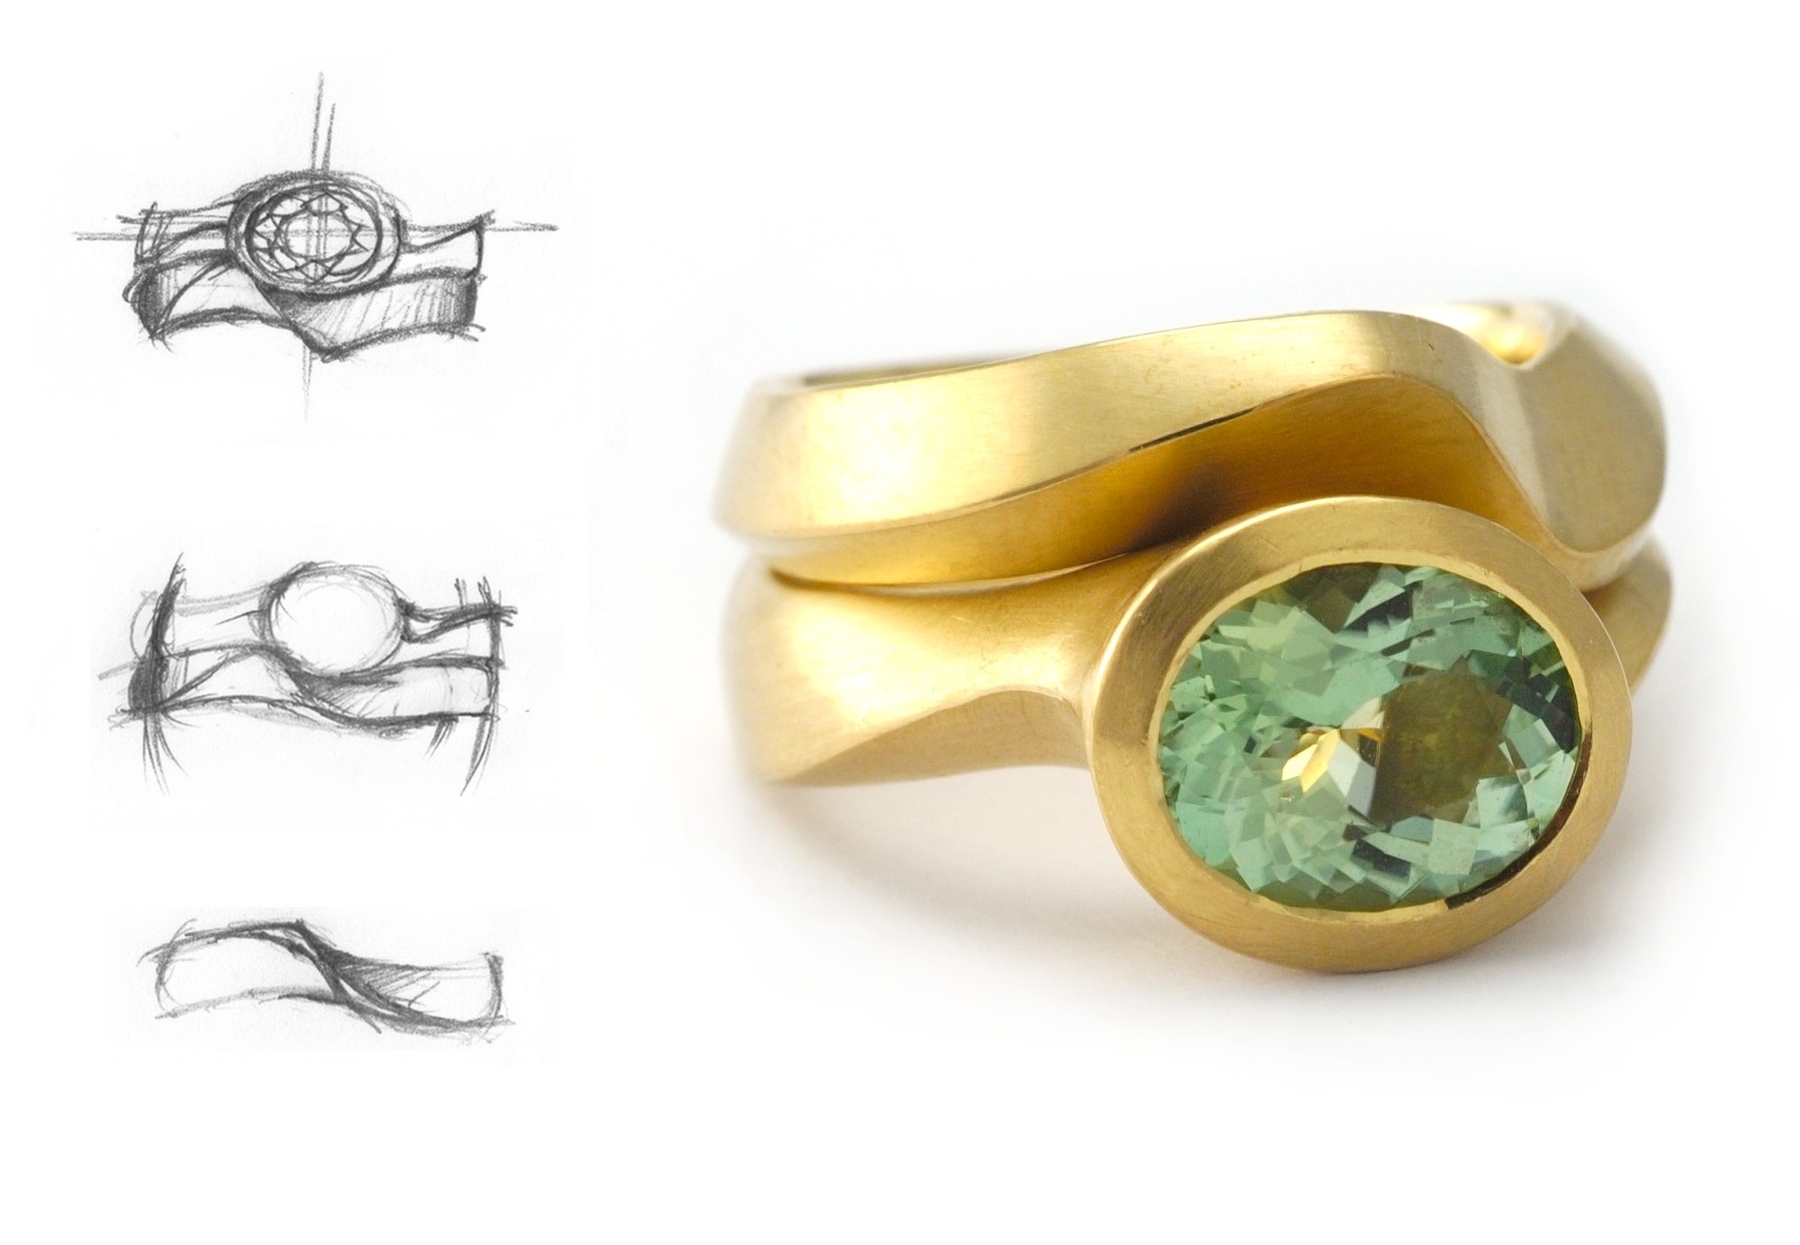 Carved gold and tourmaline engagement ring with fitted band and sketches